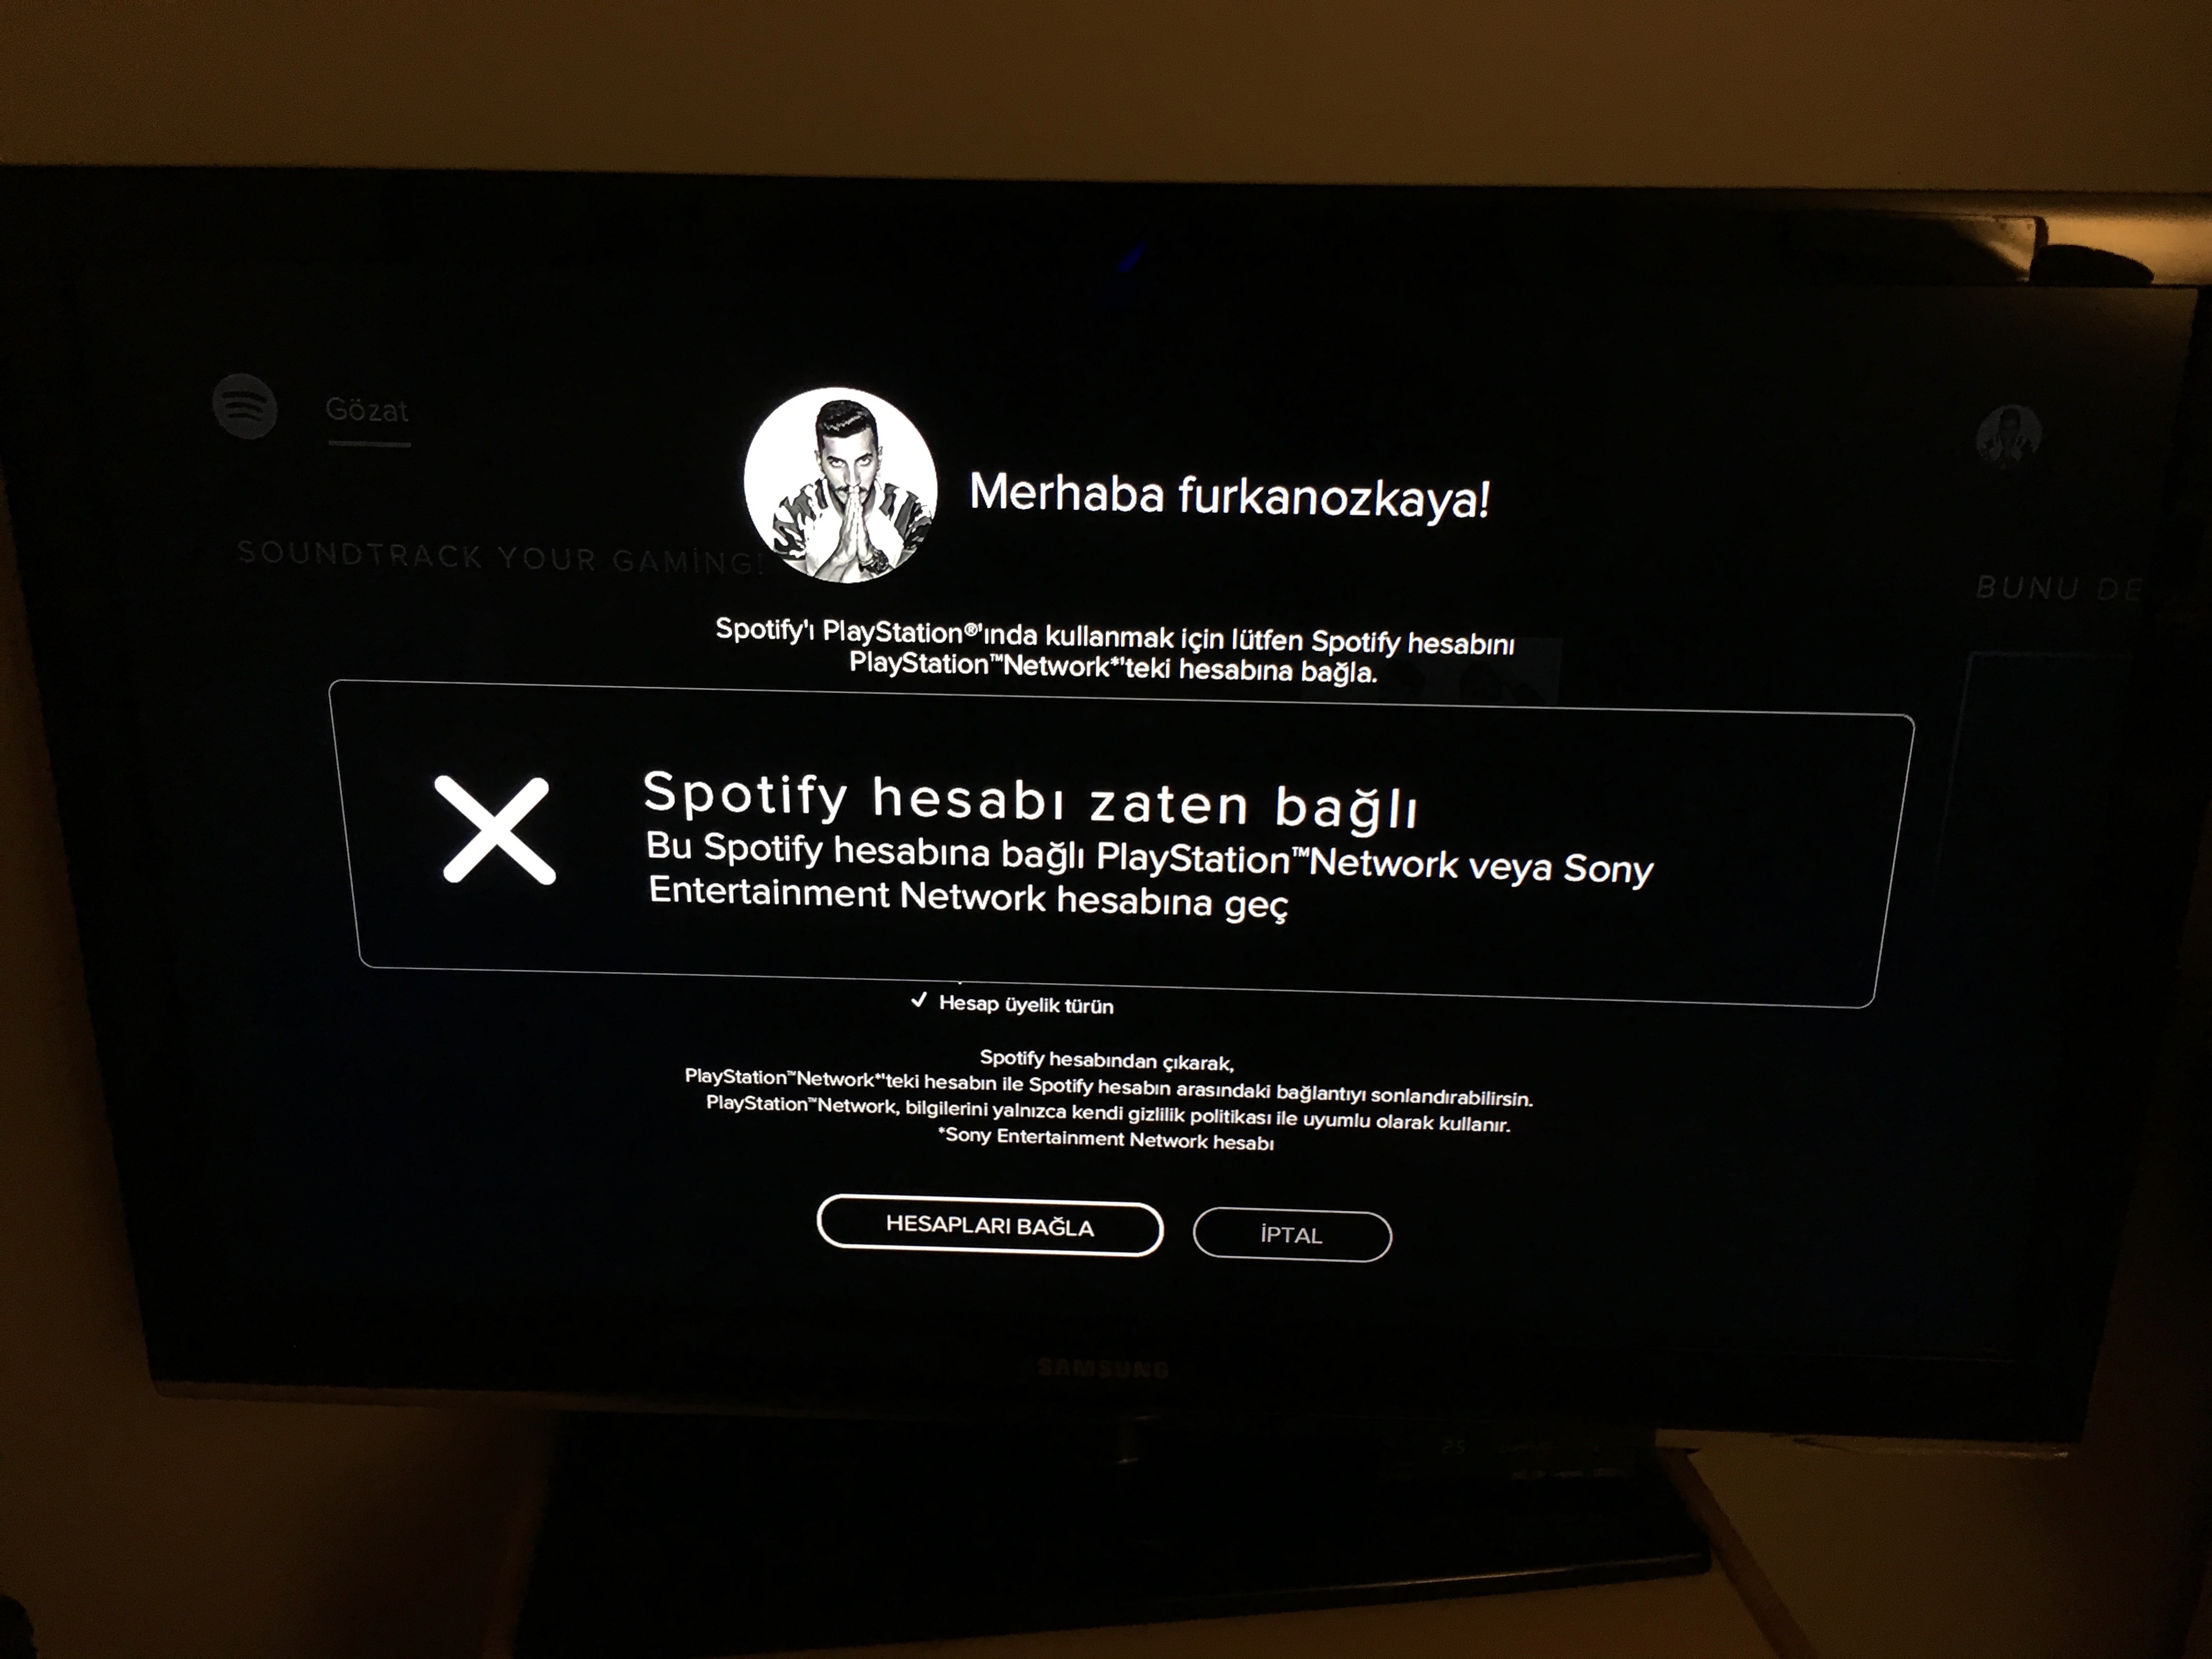 Solved: Can't login to Spotify on Playstation 4 - Page 2 - The Spotify  Community